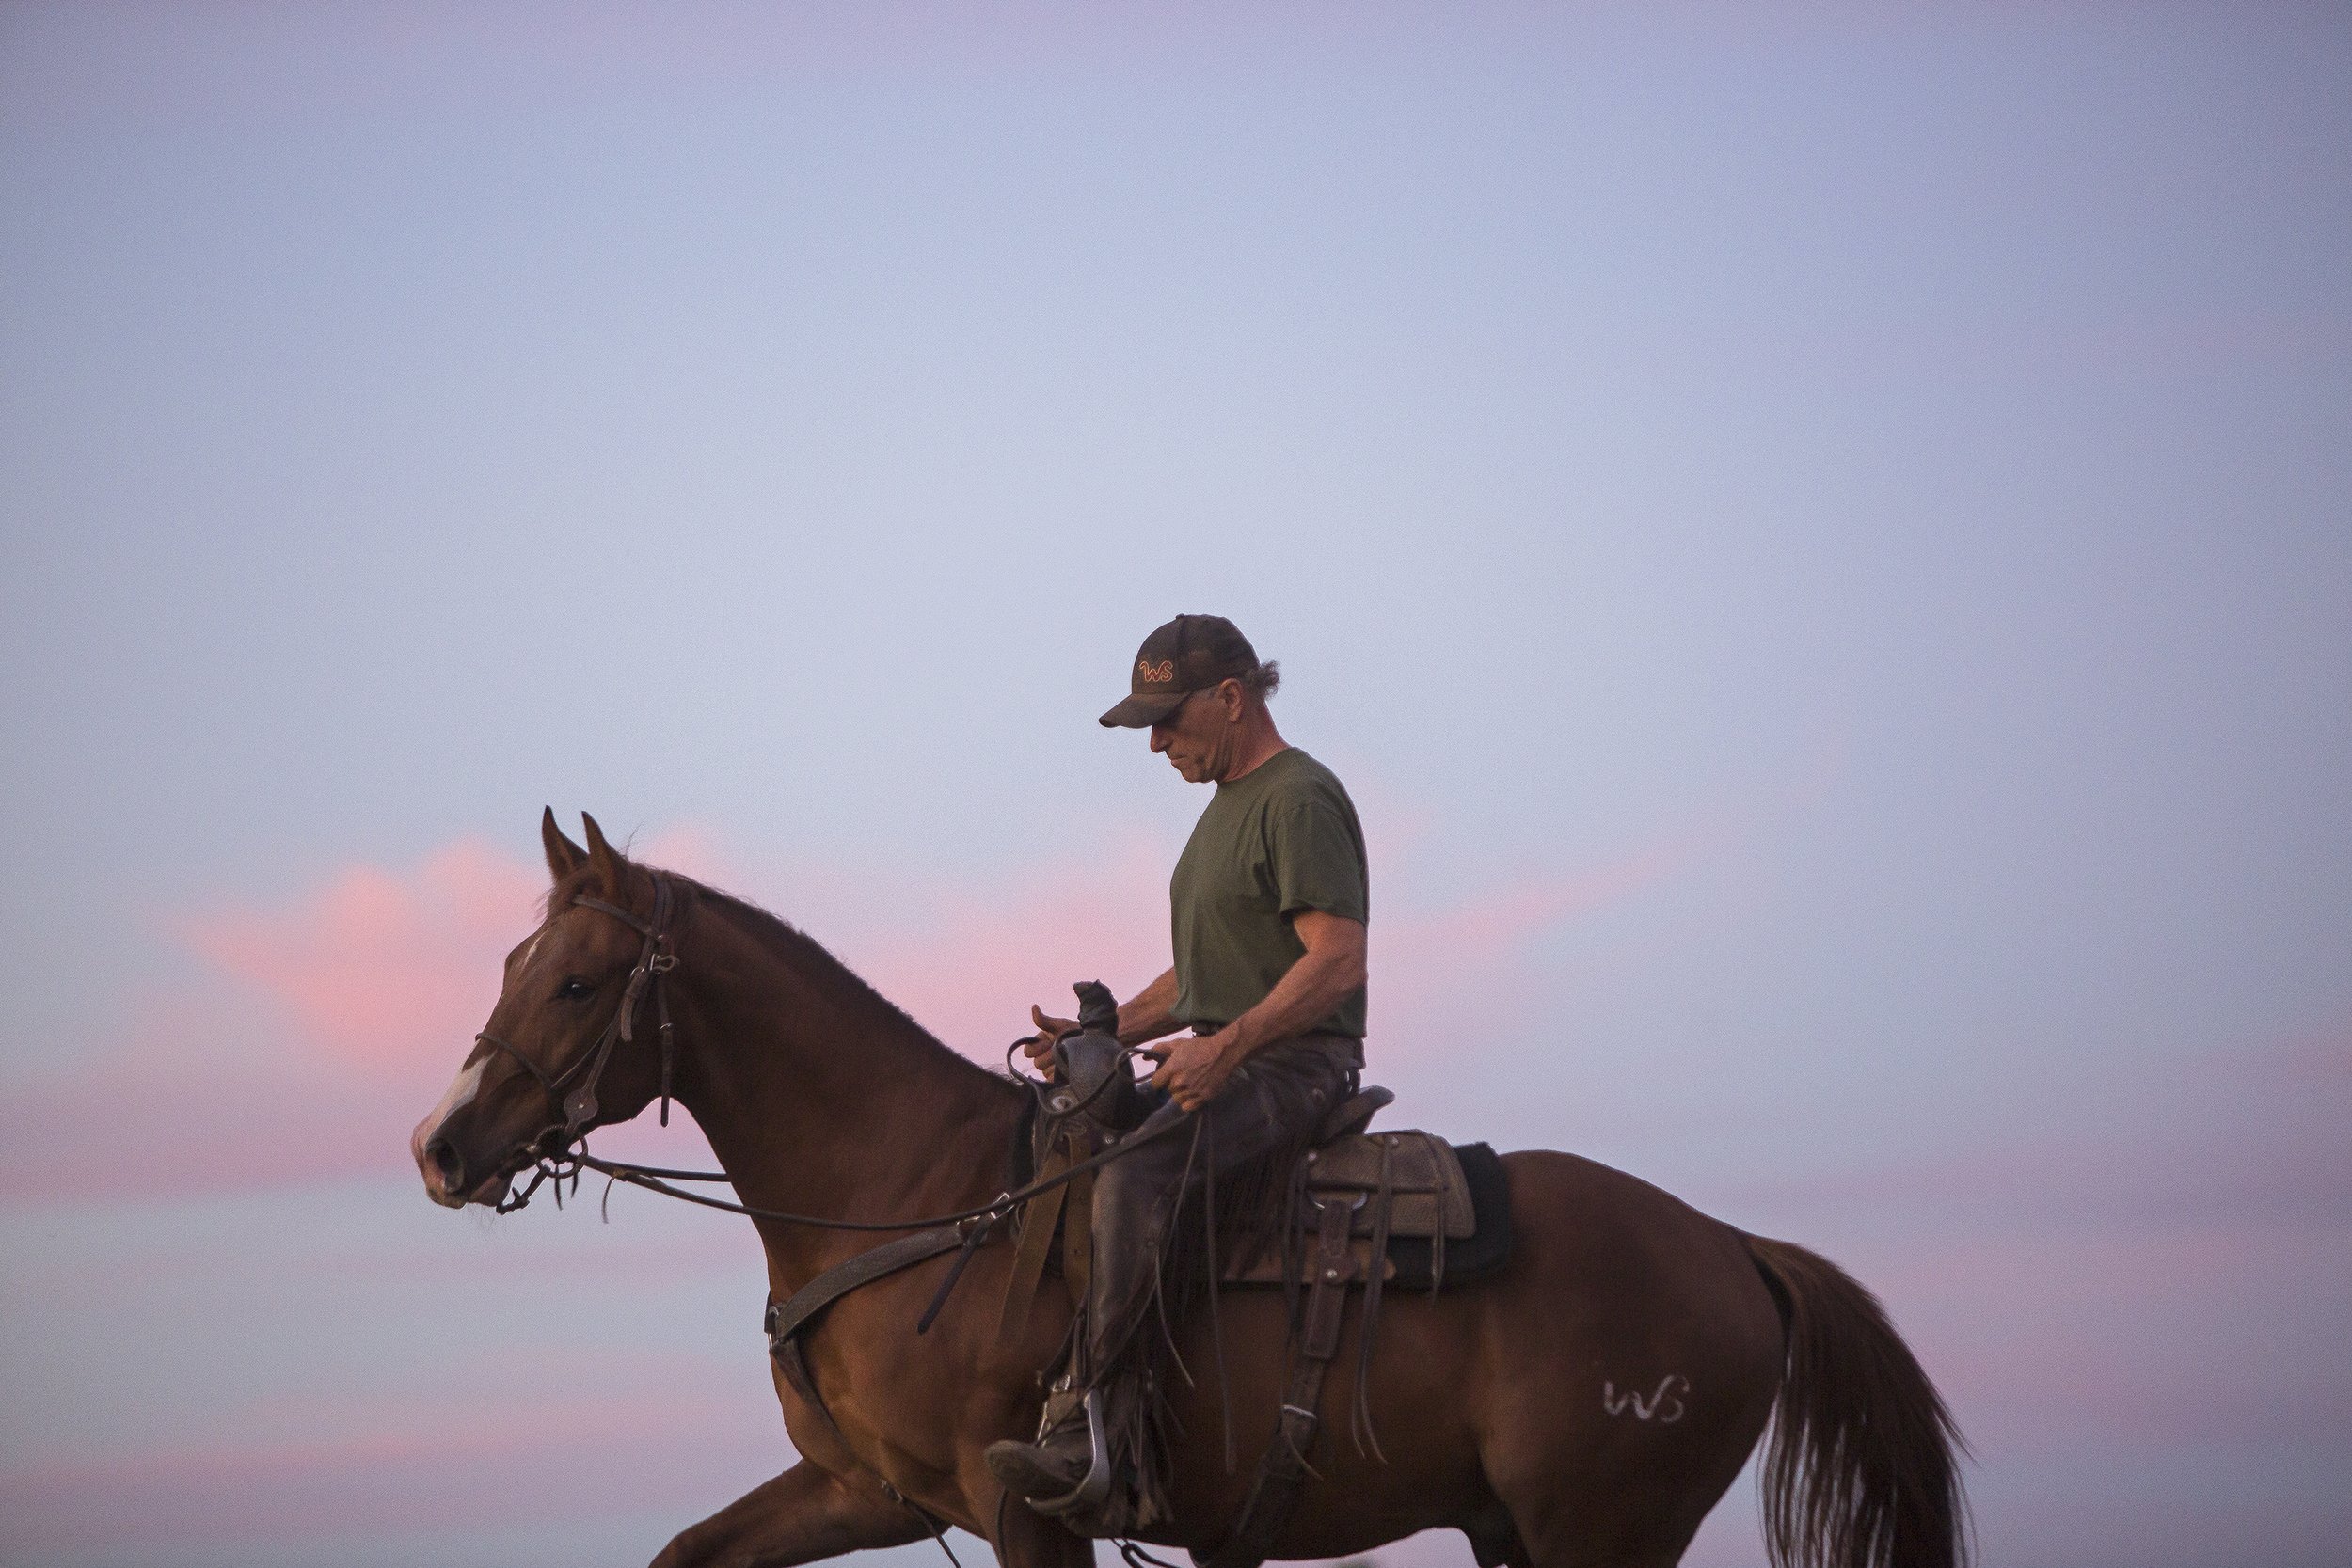  “I’ve just been crazy about horses my whole life,” said Nathan Jones, founder of Wild Serenade Ranch in Pike County, Indiana. “Even still yet today, I just love a horse and I always will.” Jones shoes and trains horses and raises longhorn cattle on 